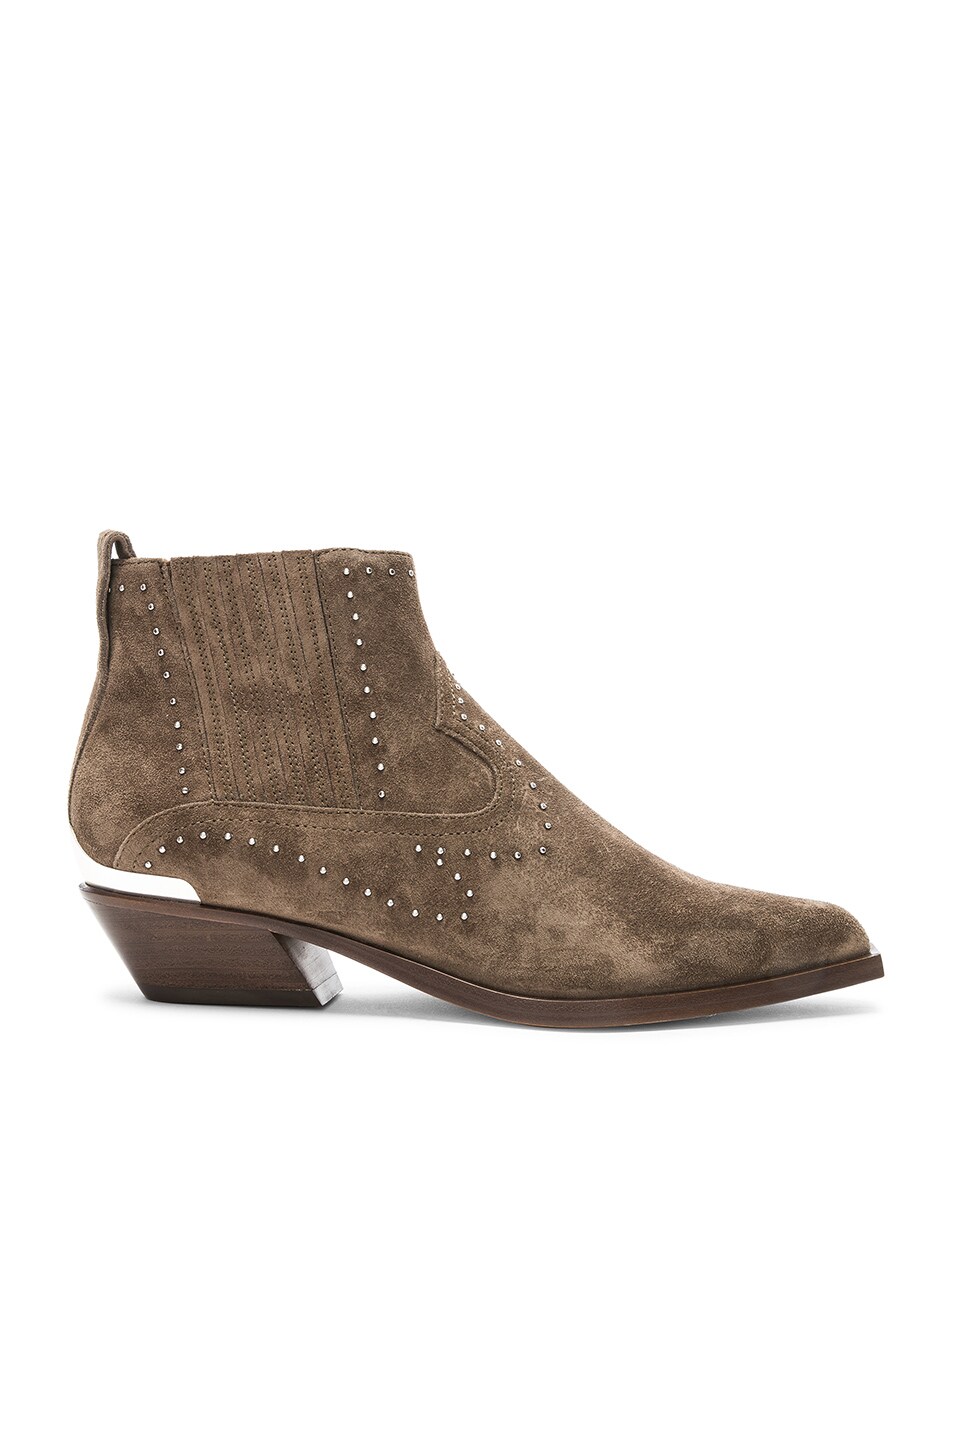 Image 1 of Rag & Bone Suede Westin Boots in Taupe Stud